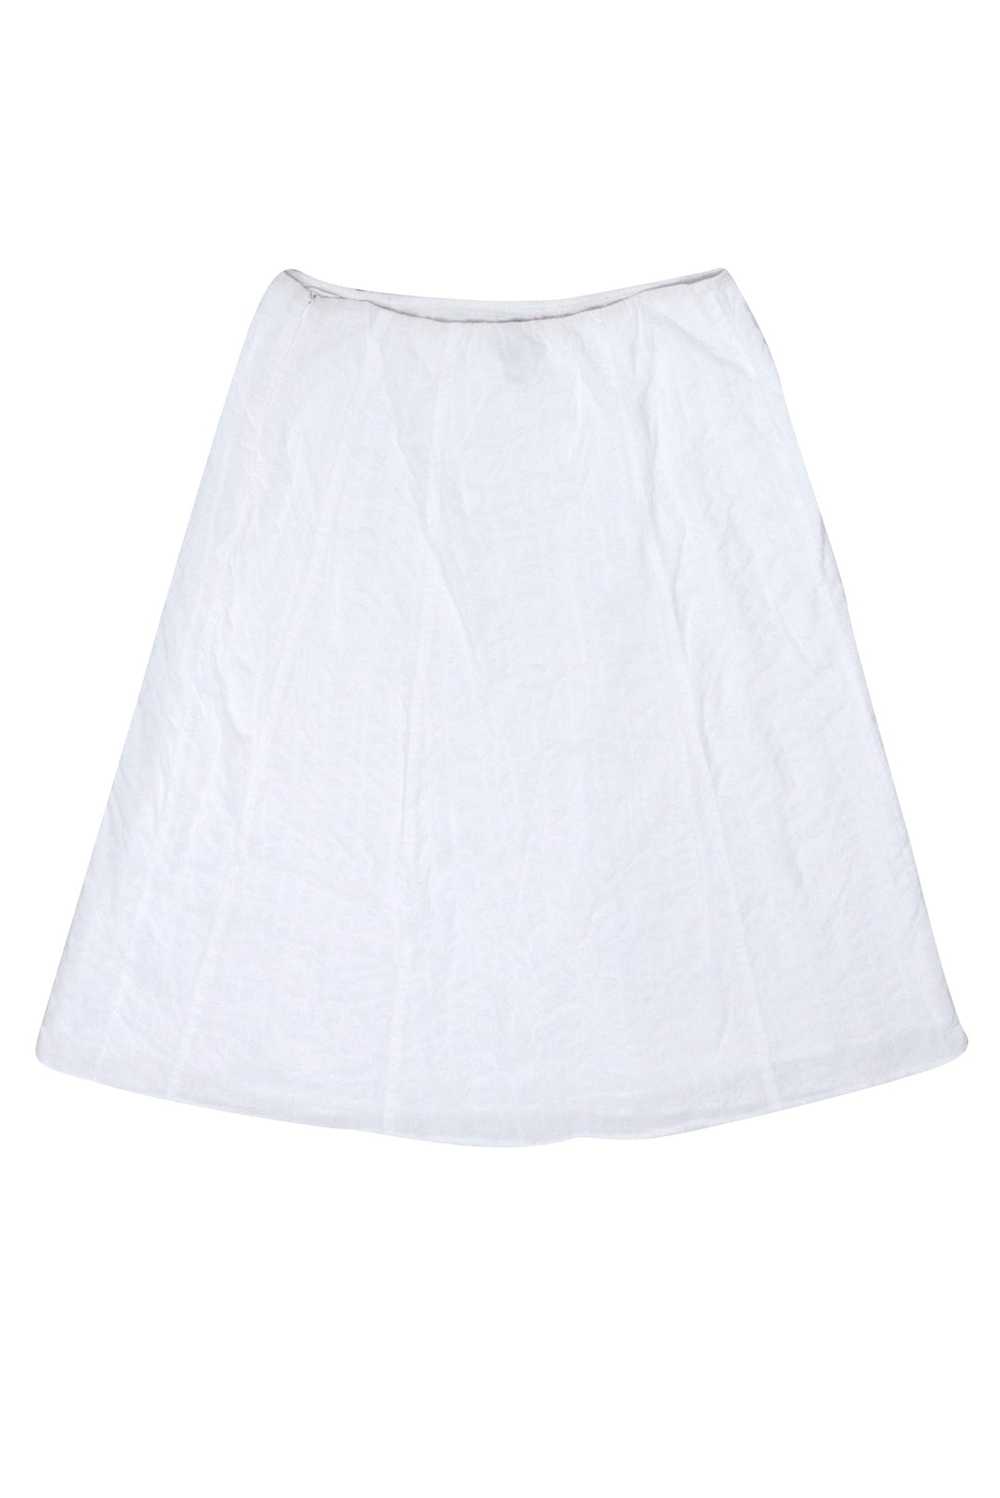 Eileen Fisher - White Textured A-line Skirt Sz S - image 2